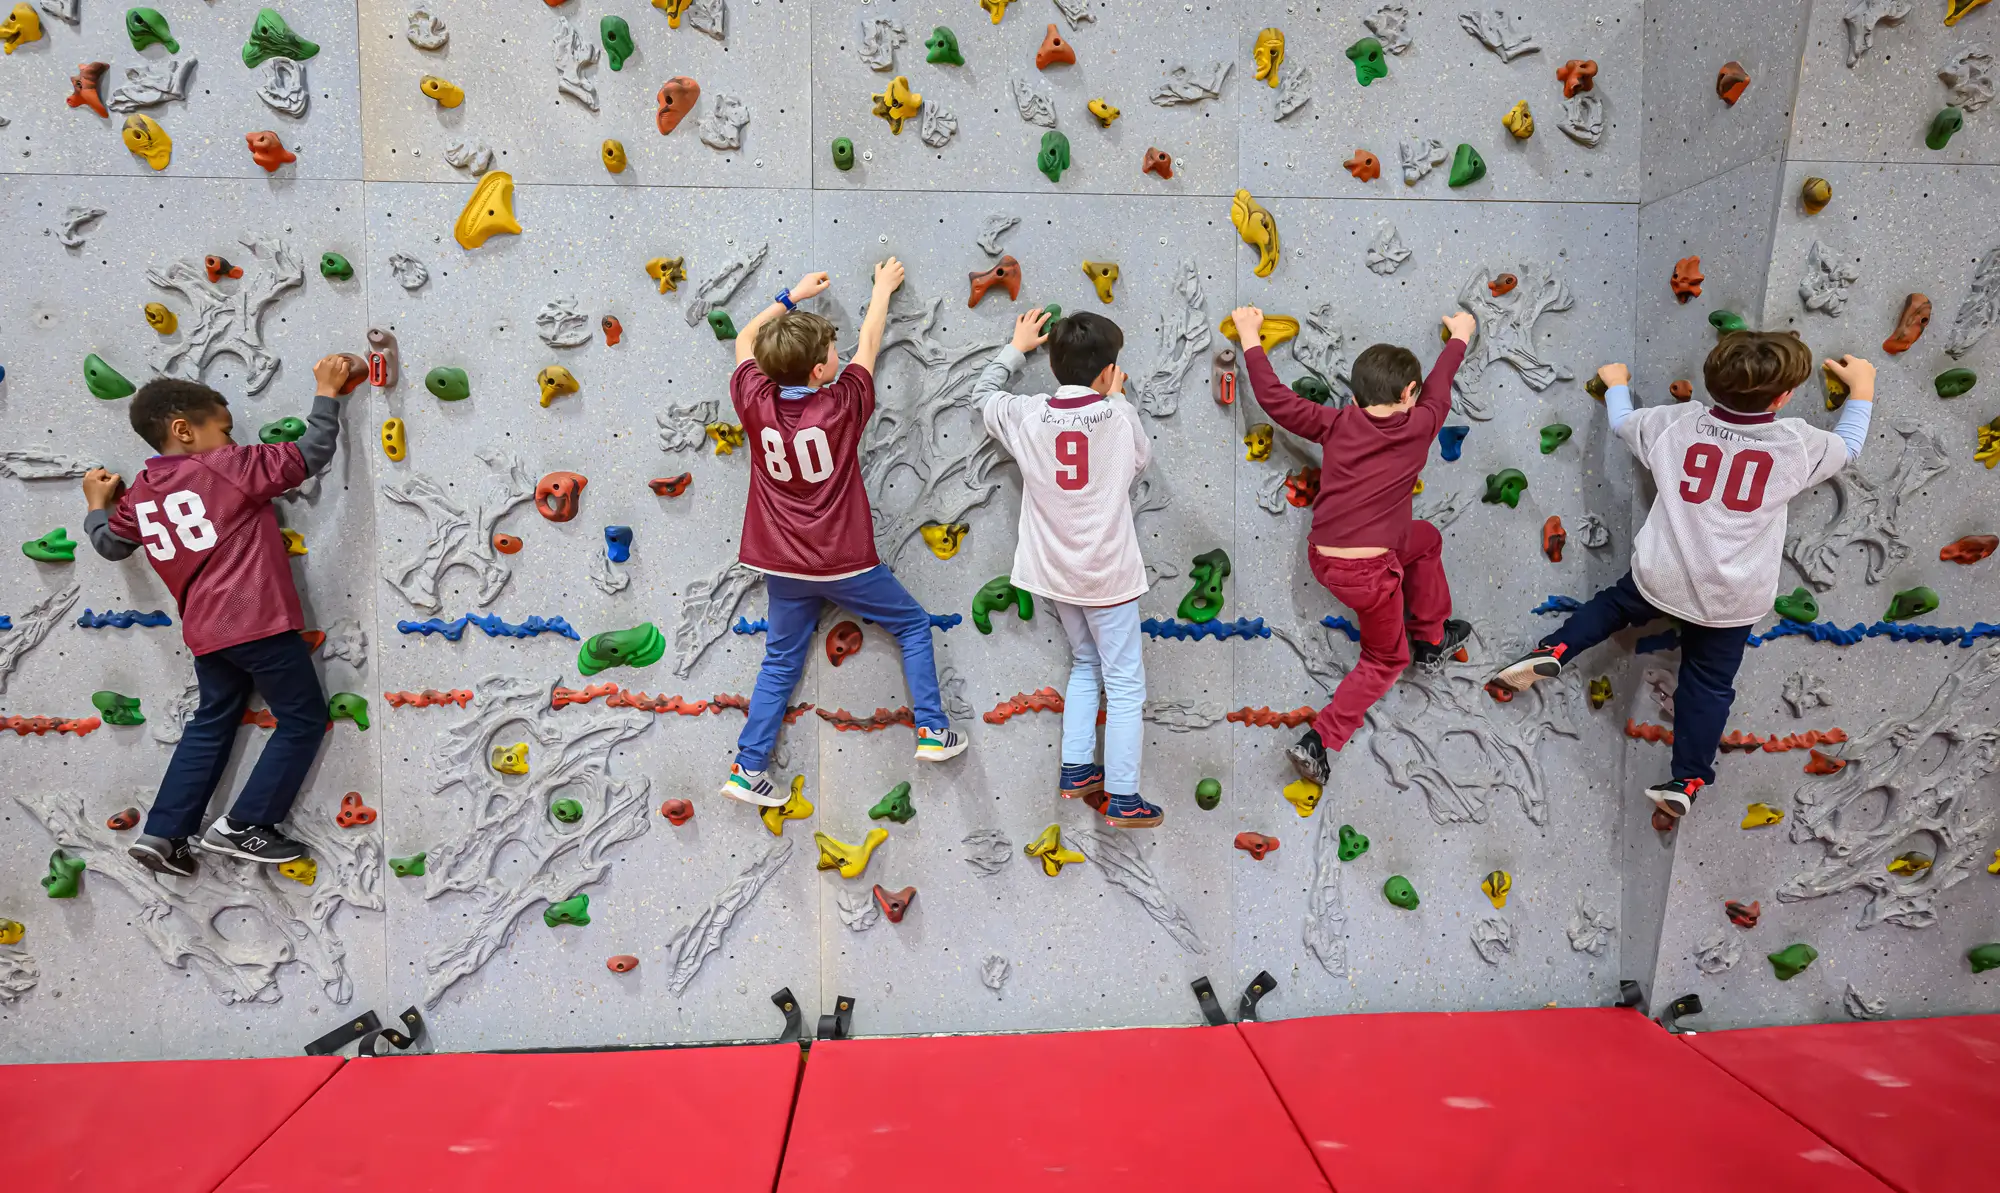 Young boys play on a climbing wall at a gym